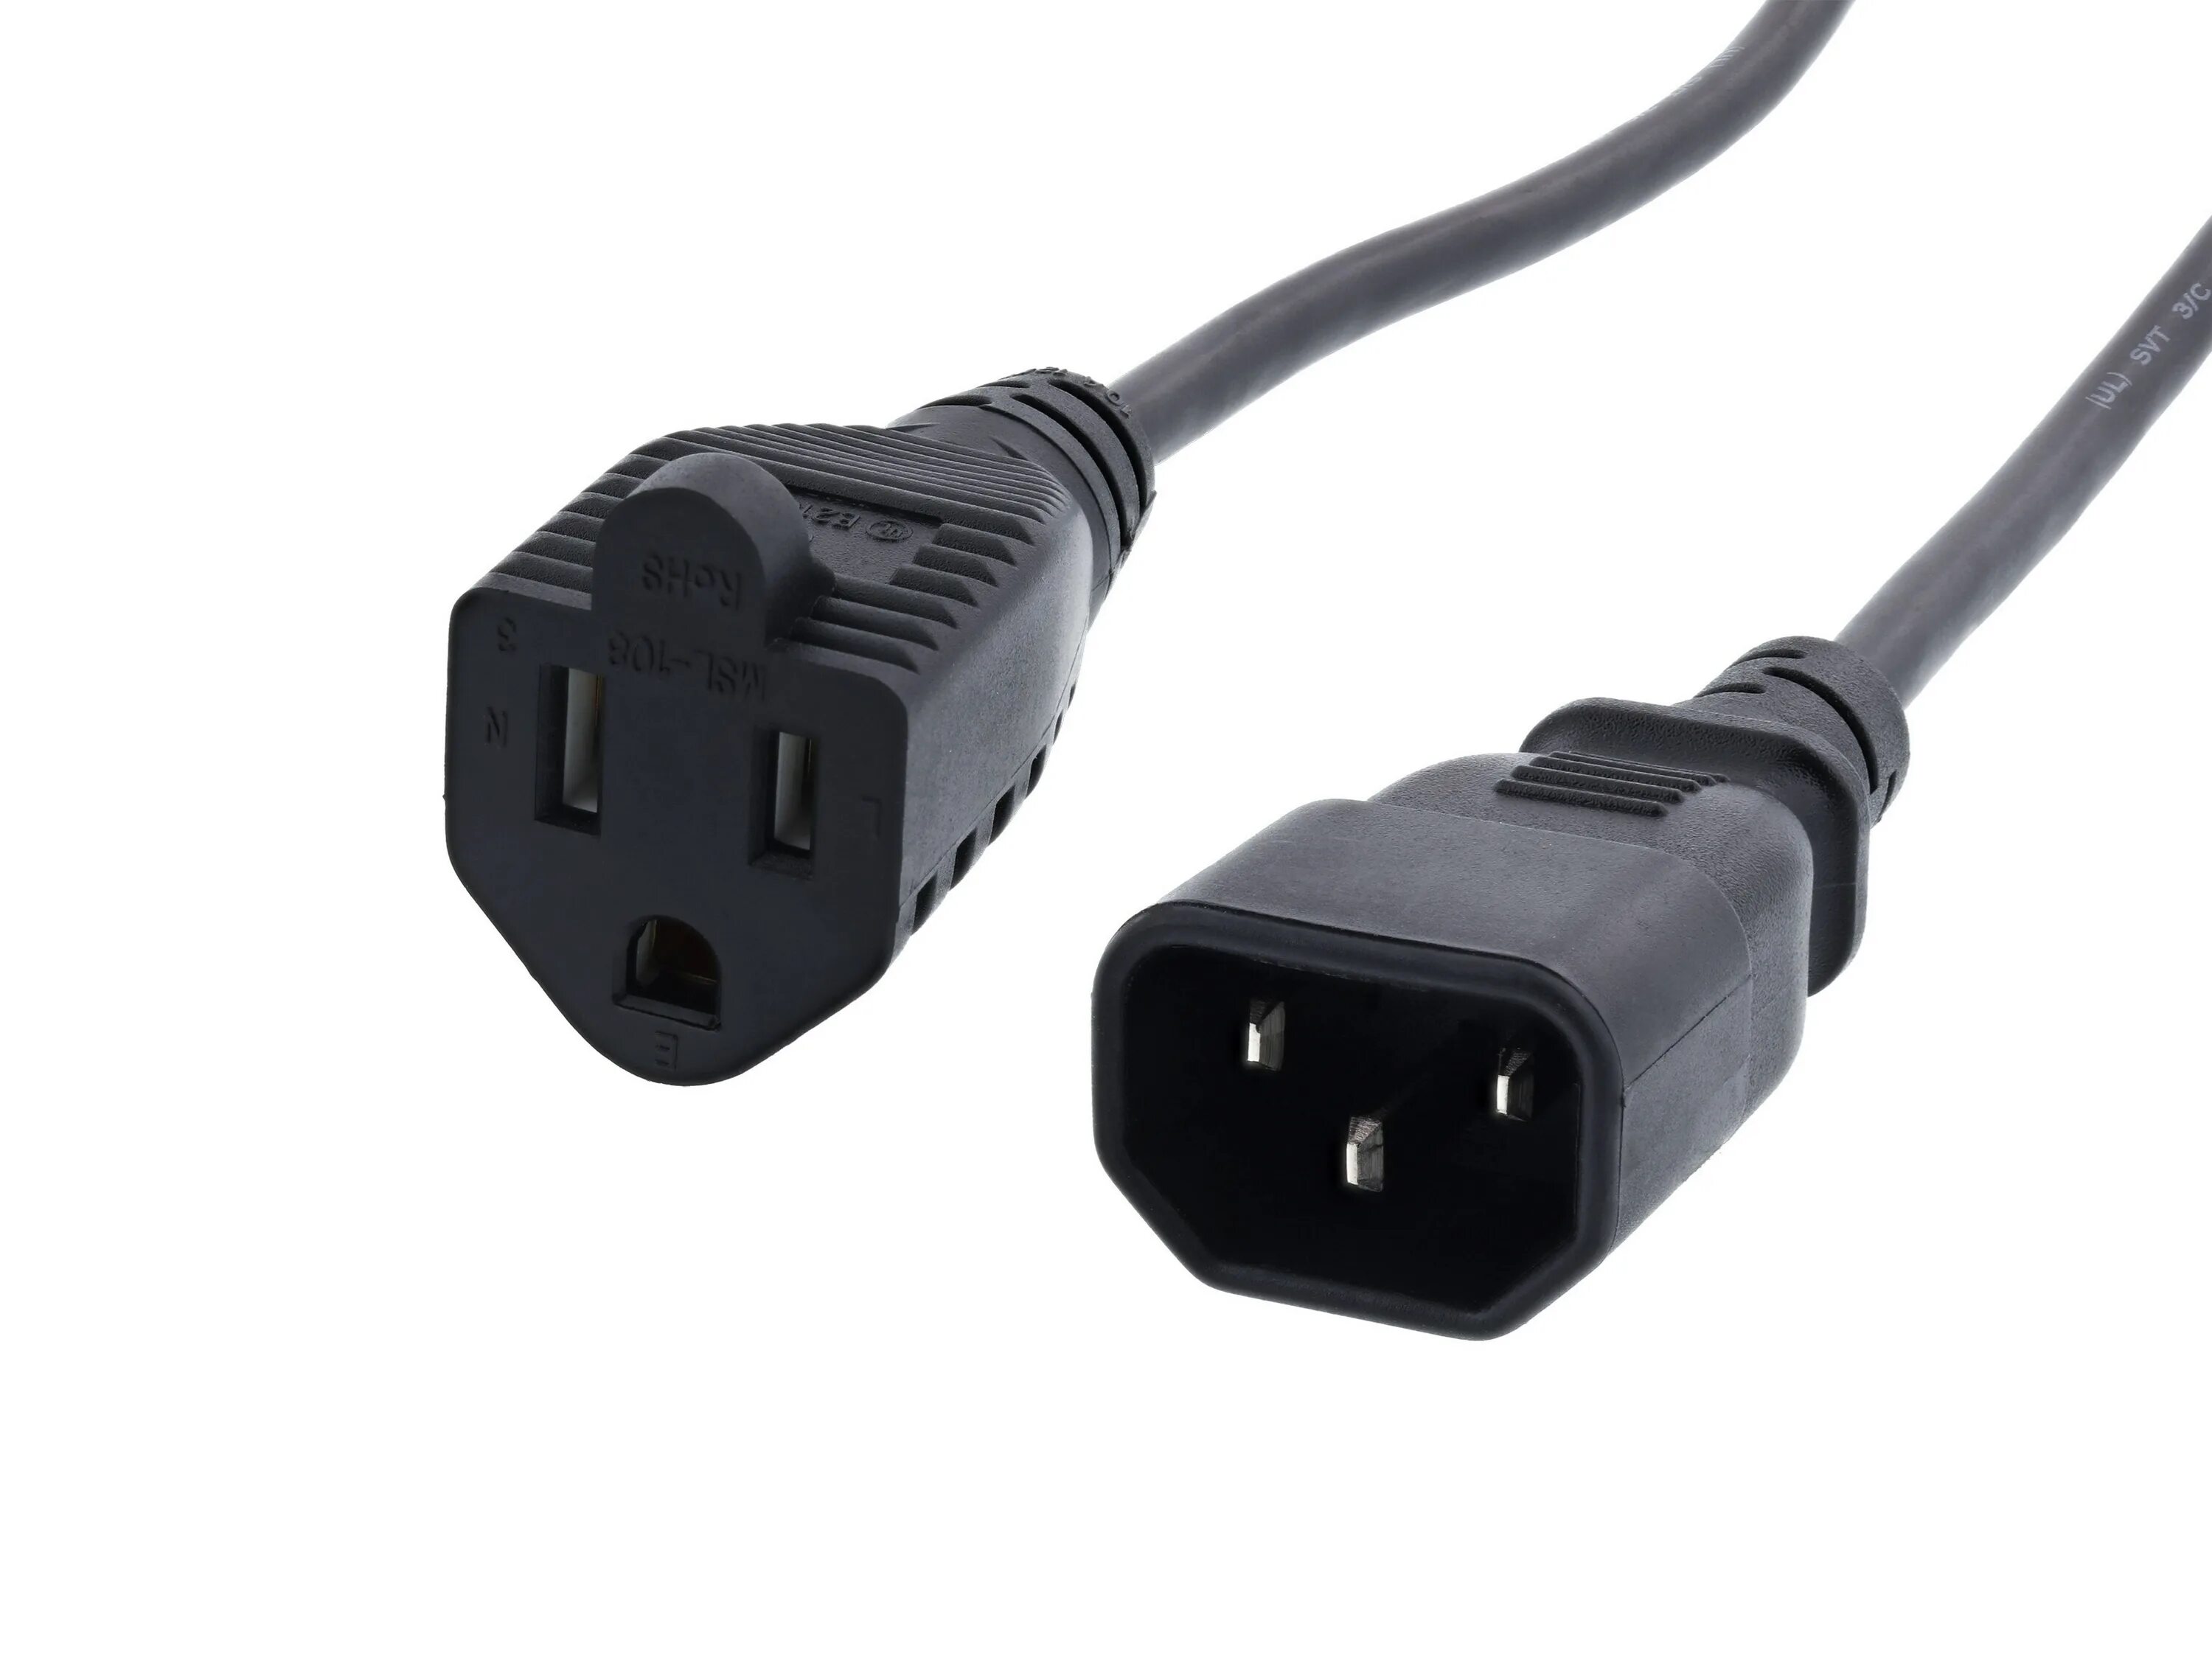 AC Power Cord. 4200280000000 Hytera Power Cord. AC Power. What is AC Cord. Ac power adapter